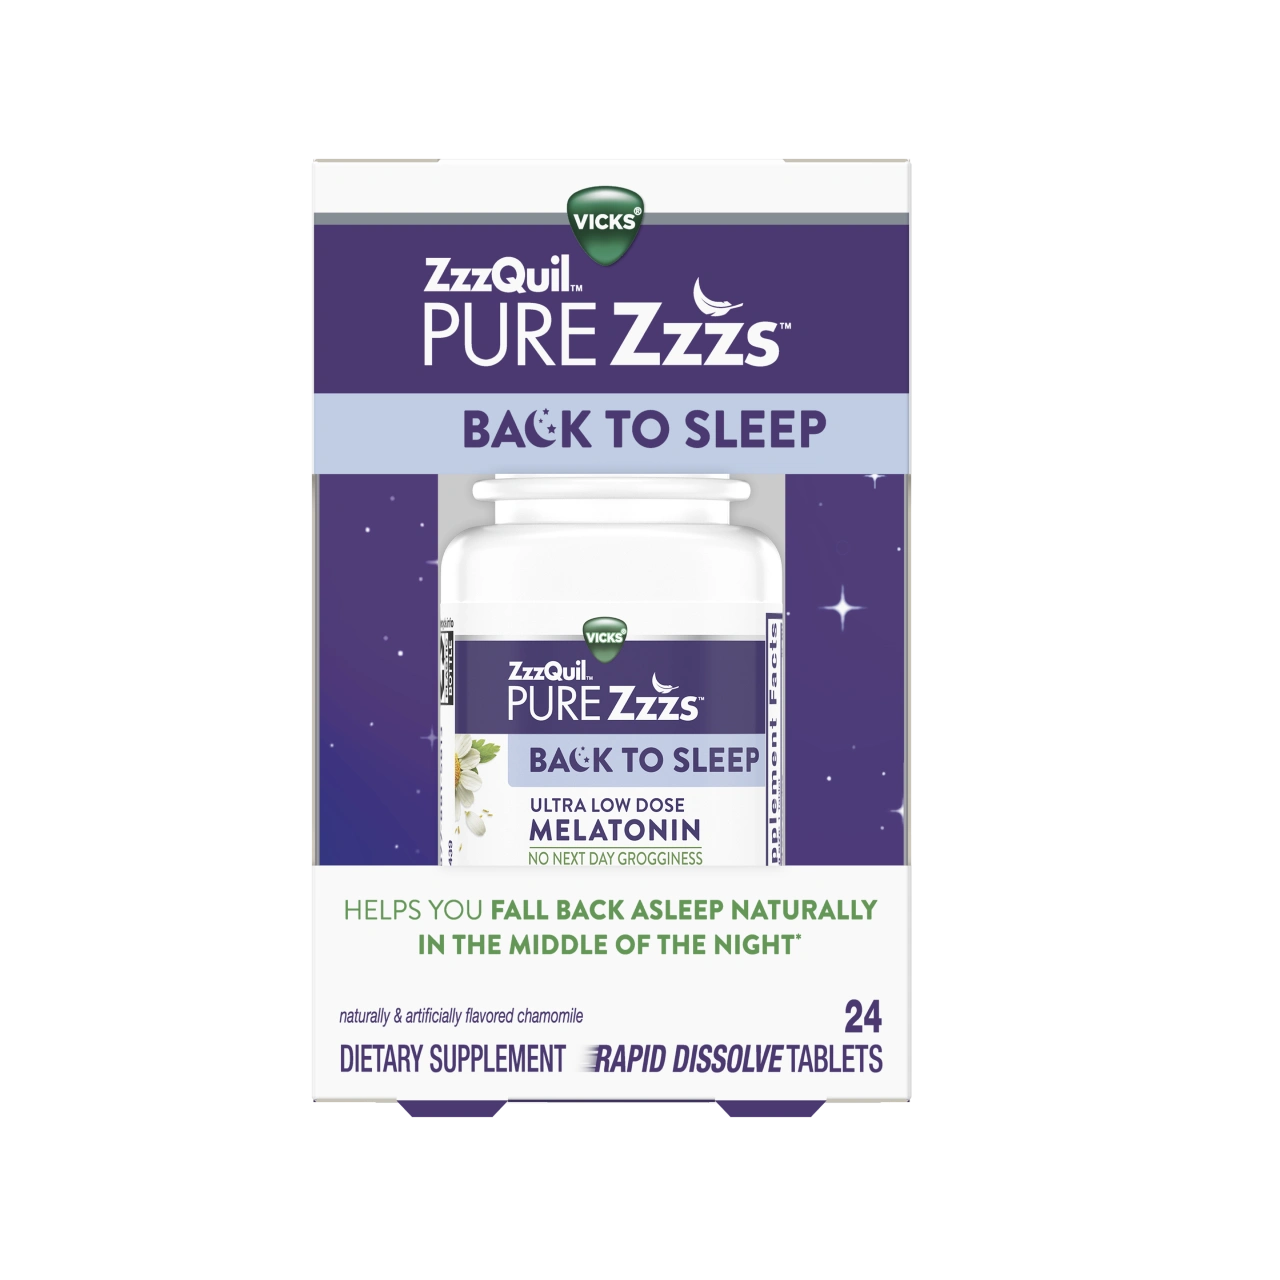 Vicks ZzzQuil PURE Zzzs Back to Sleep Rapid Dissolve Tablets